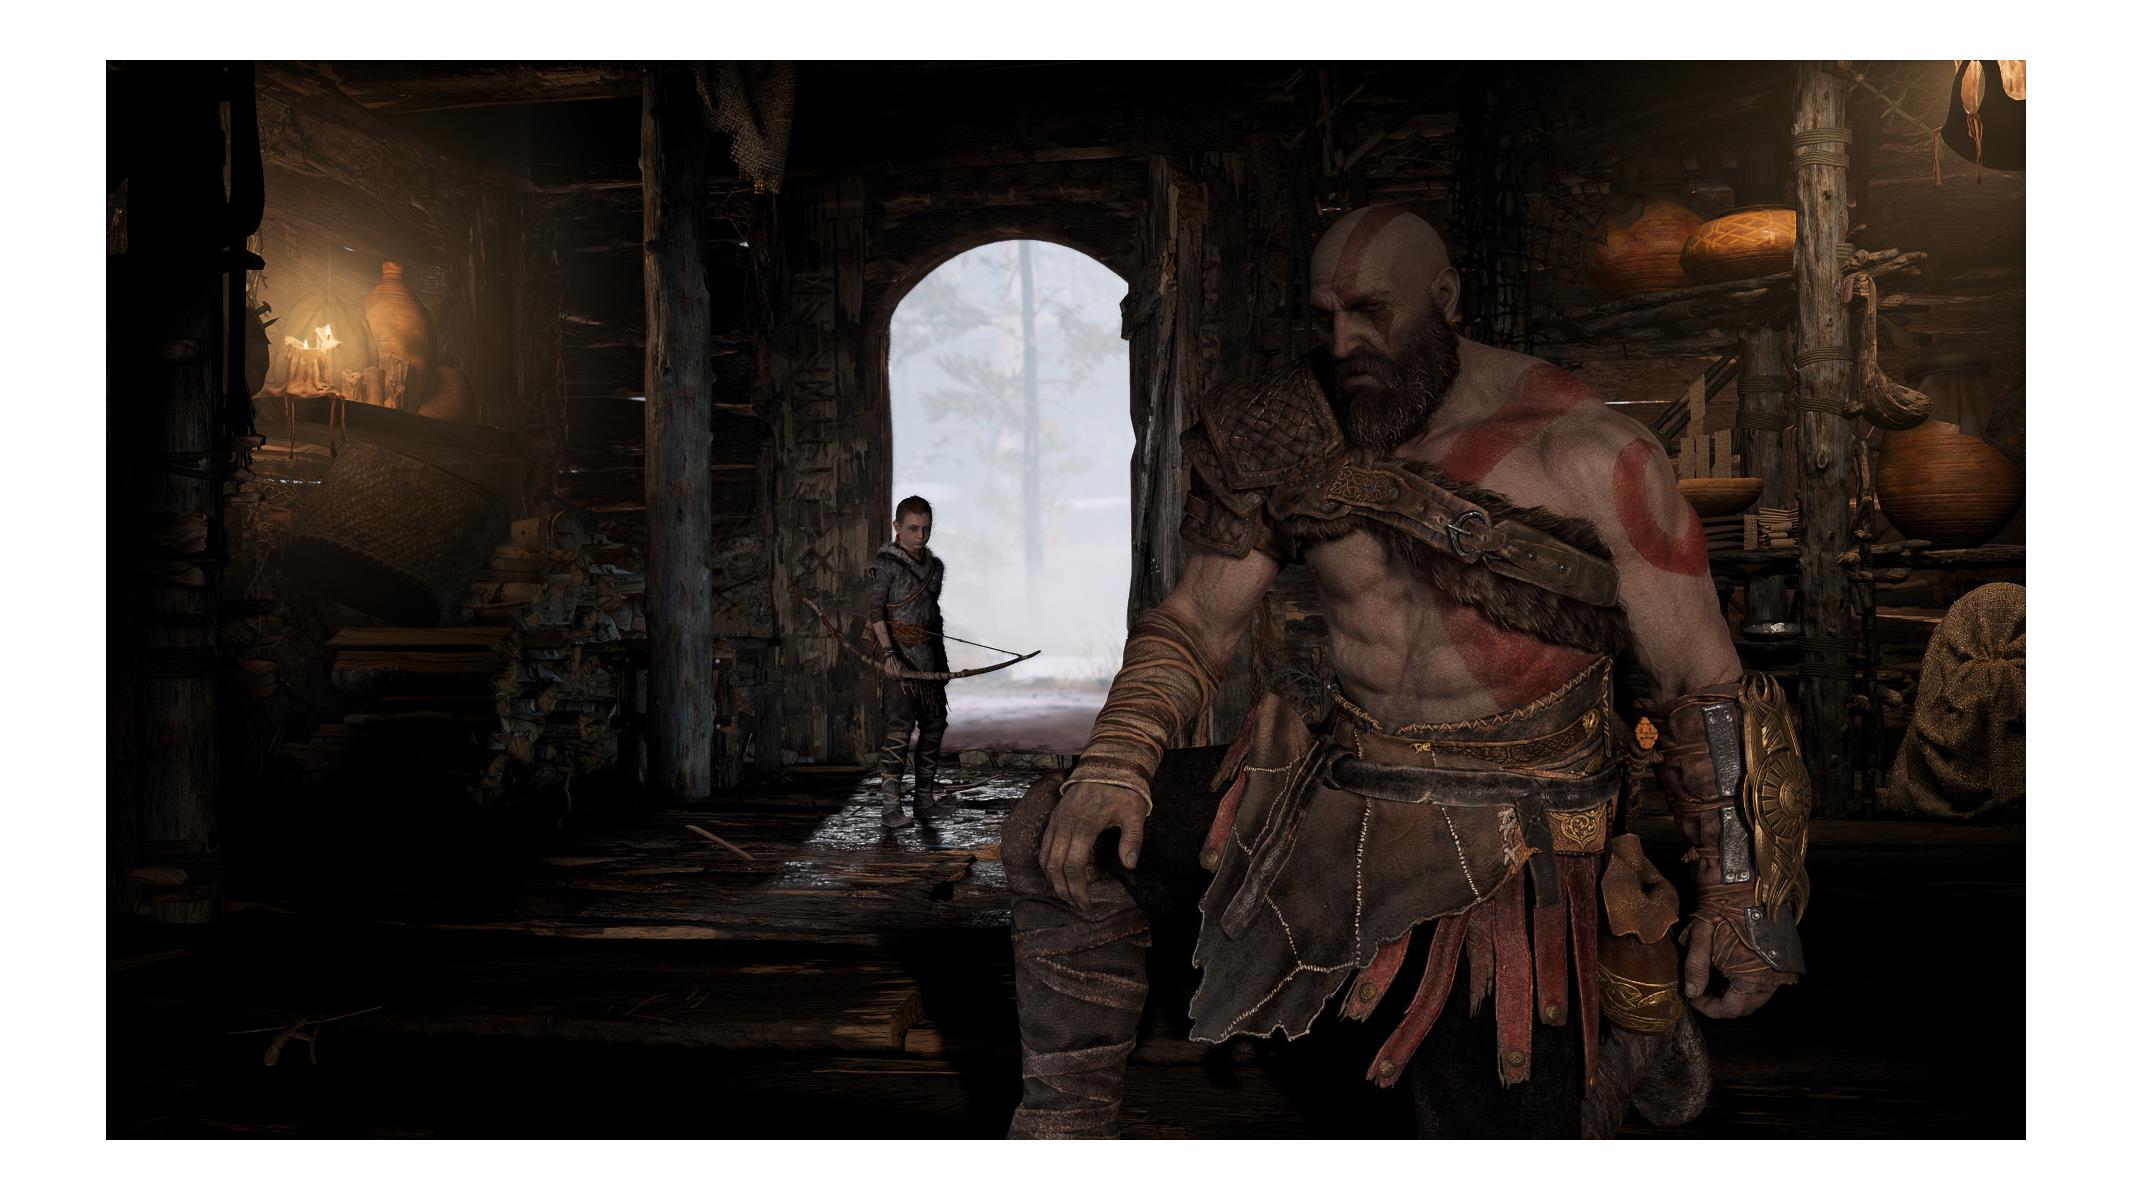 God of War PC - Disable Depth of Field 